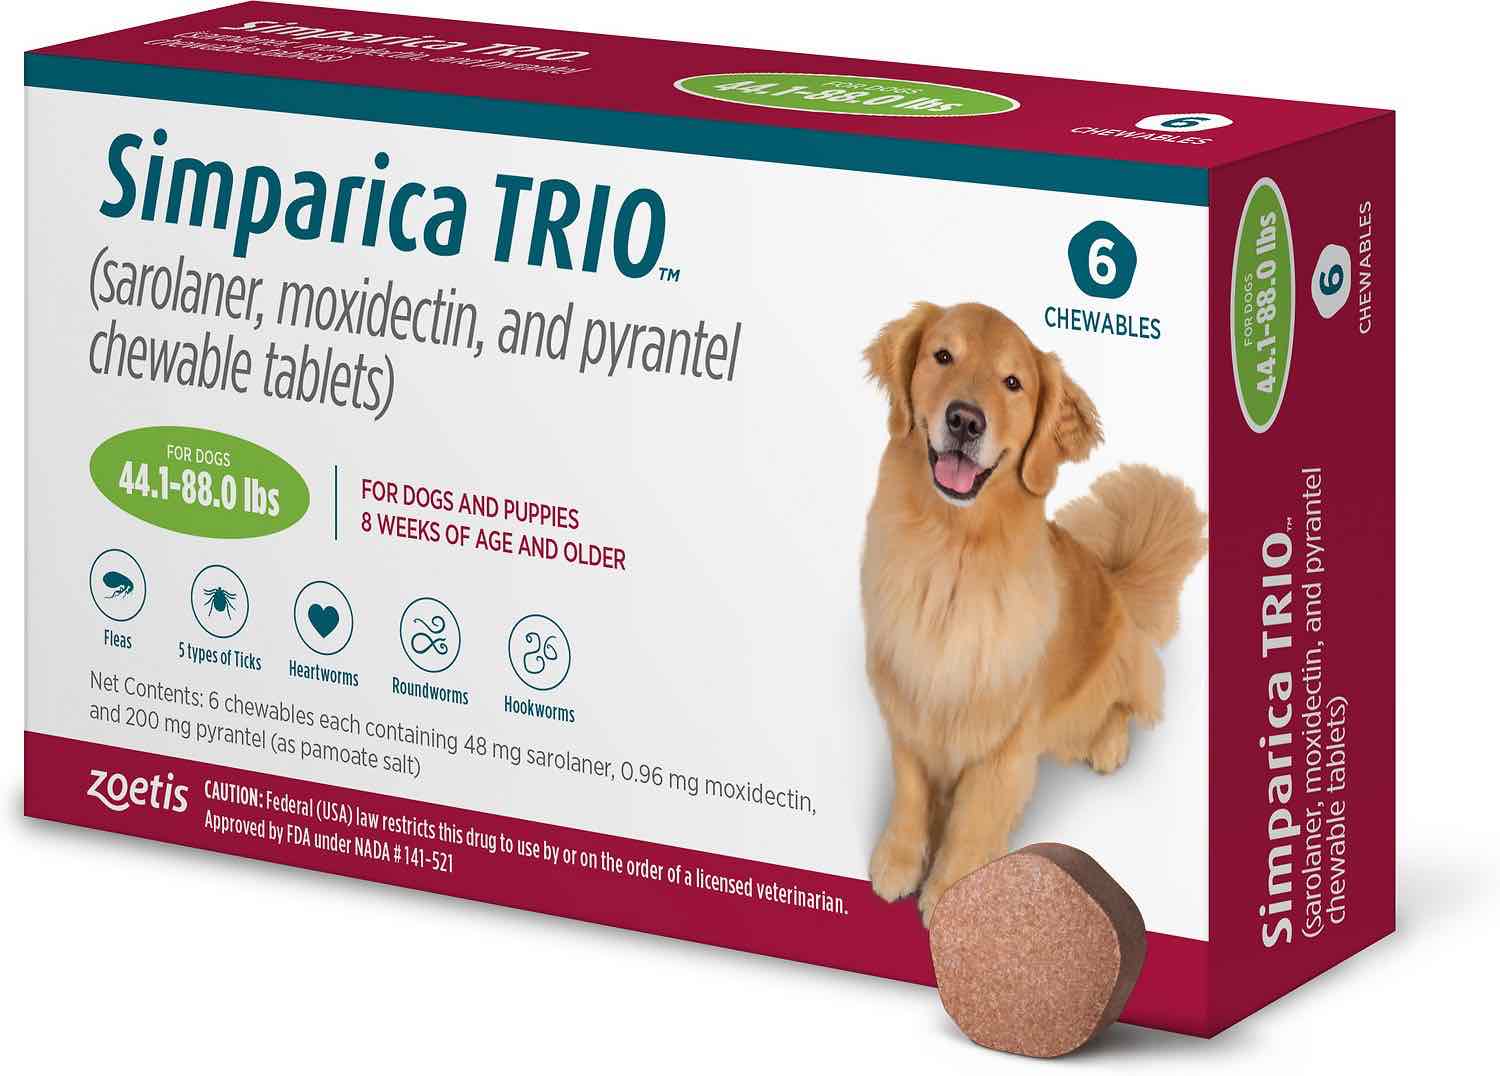 Simparica Trio 6 chewable tablets for dogs 44.1-88 lbs (Green) 1